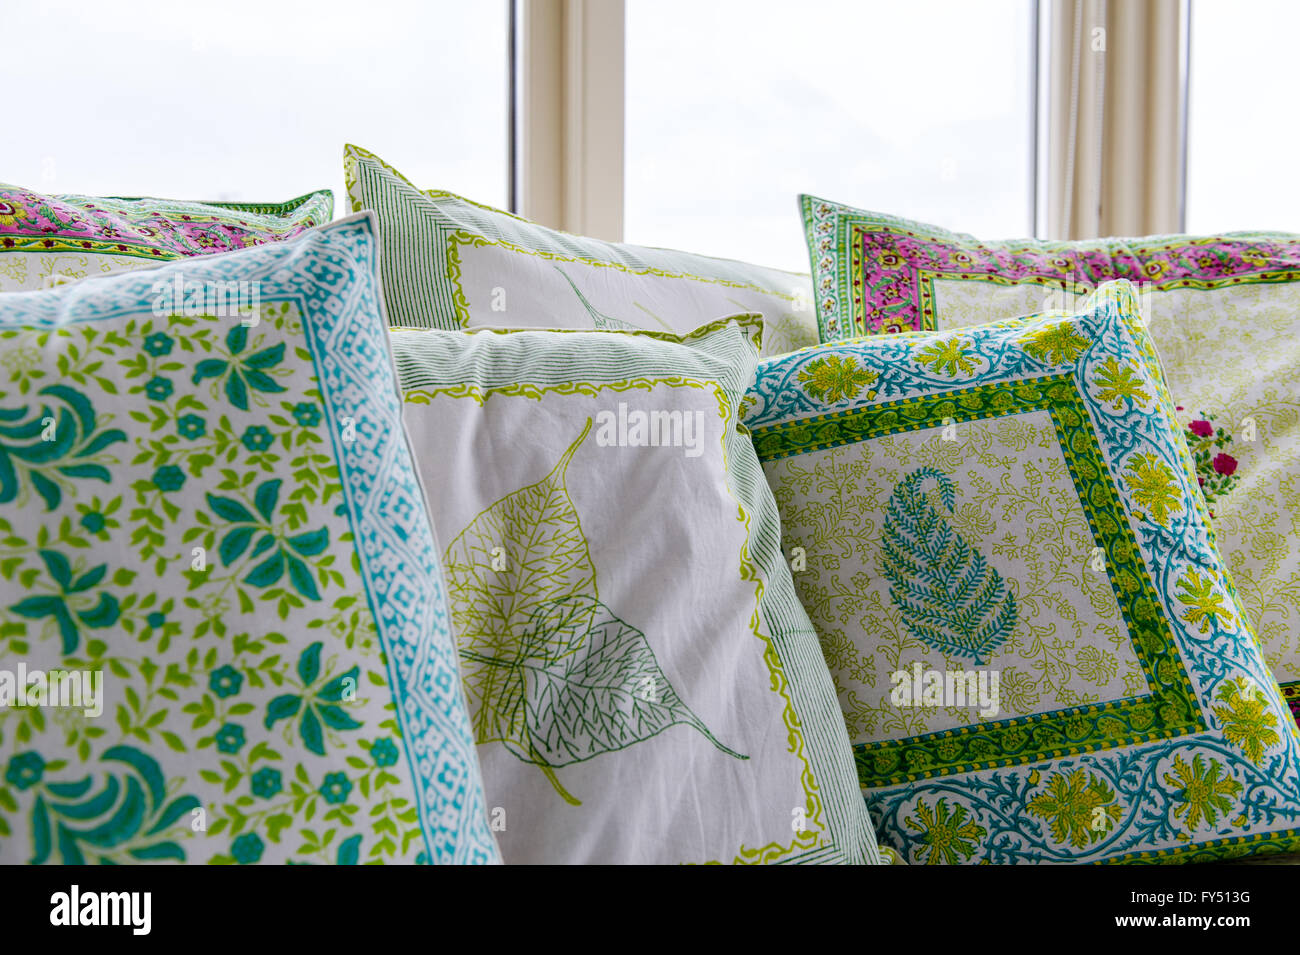 Decorative cushion covers from India in a conservatory. Stock Photo